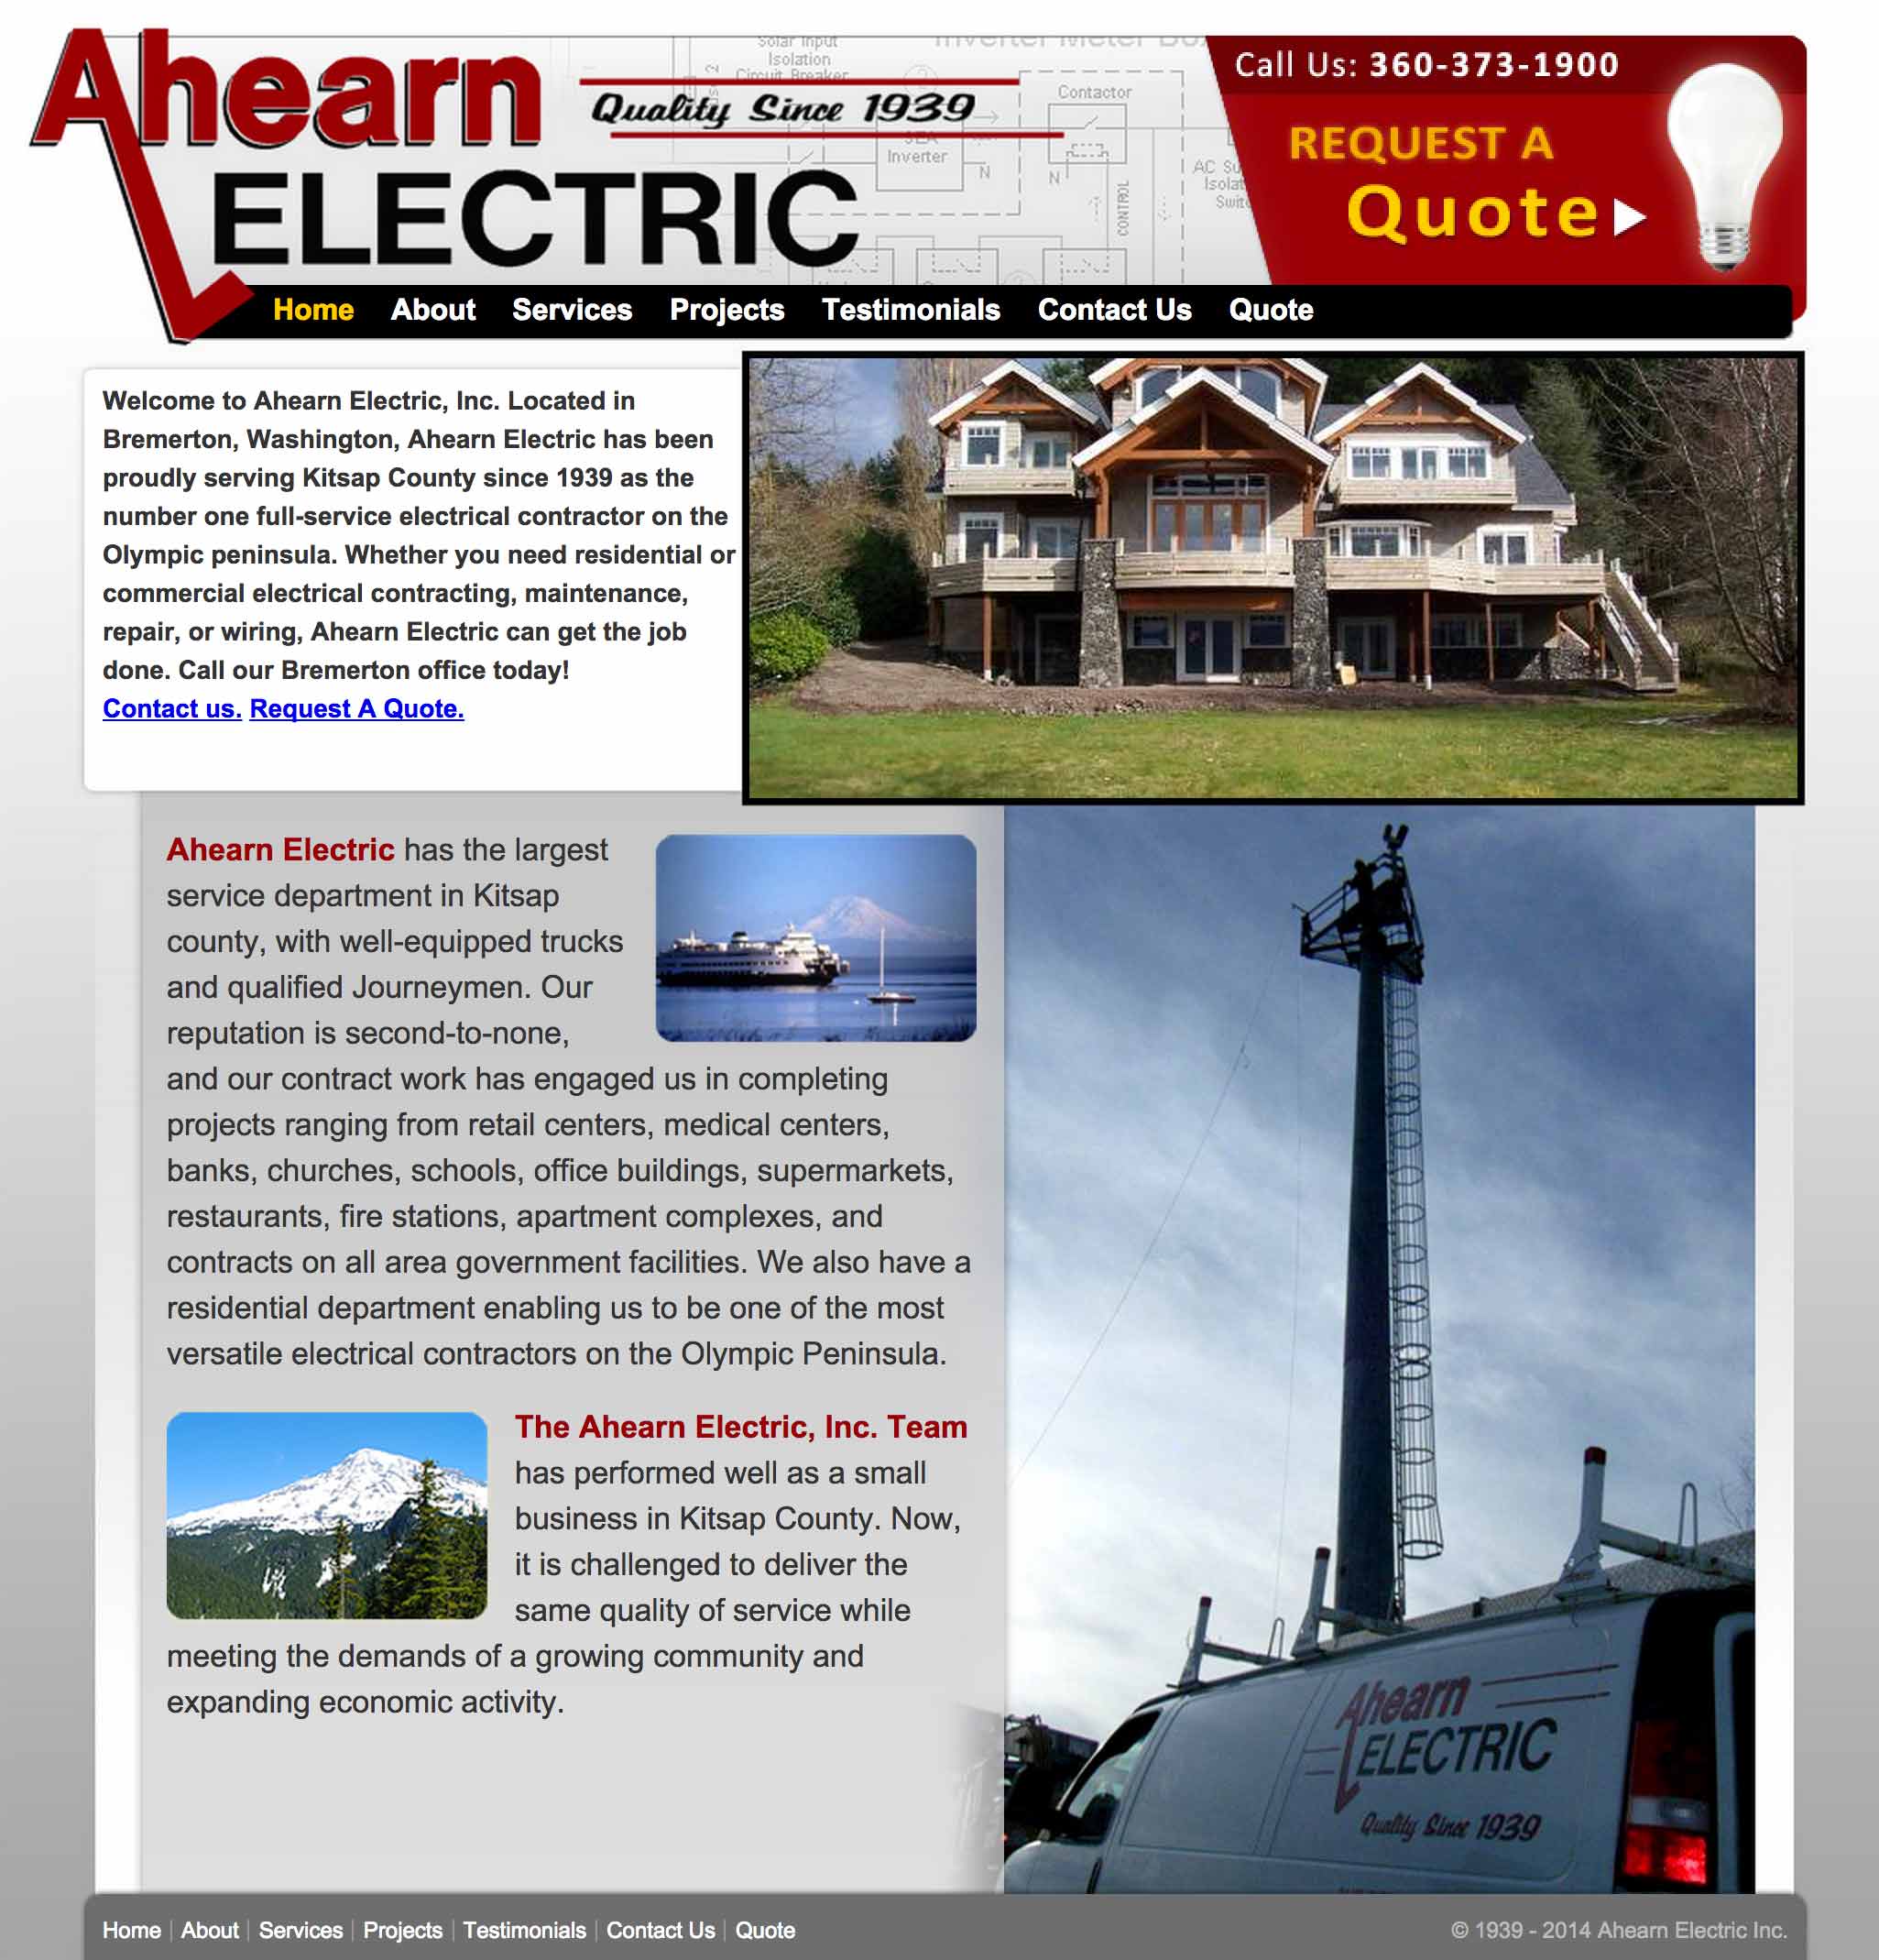 Screen shot of the Ahearn Electric web site by X7 Development LLC.